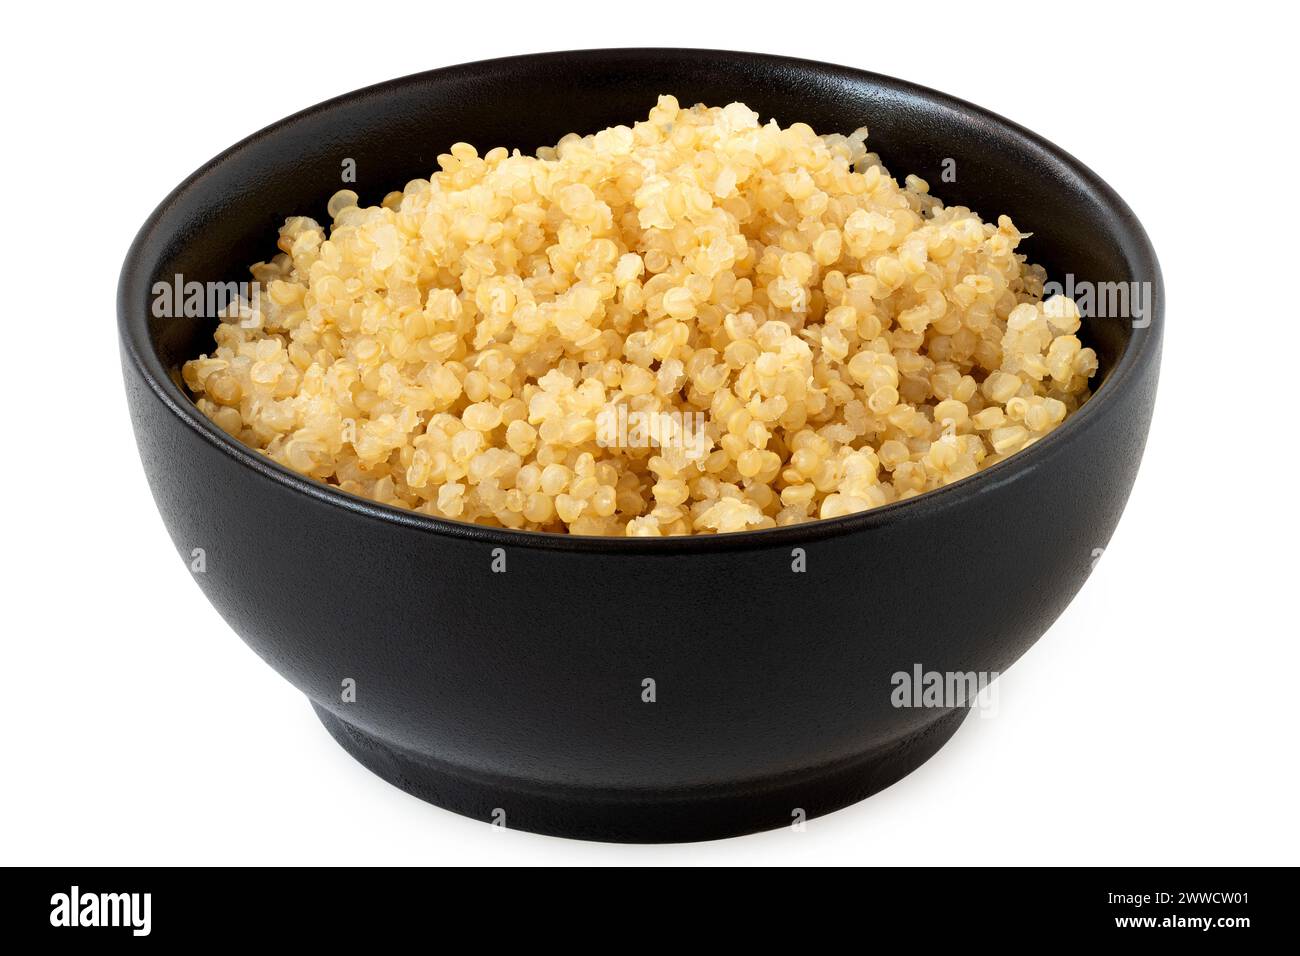 Cooked white quinoa in a black ceramic bowl isolated on white. Stock Photo